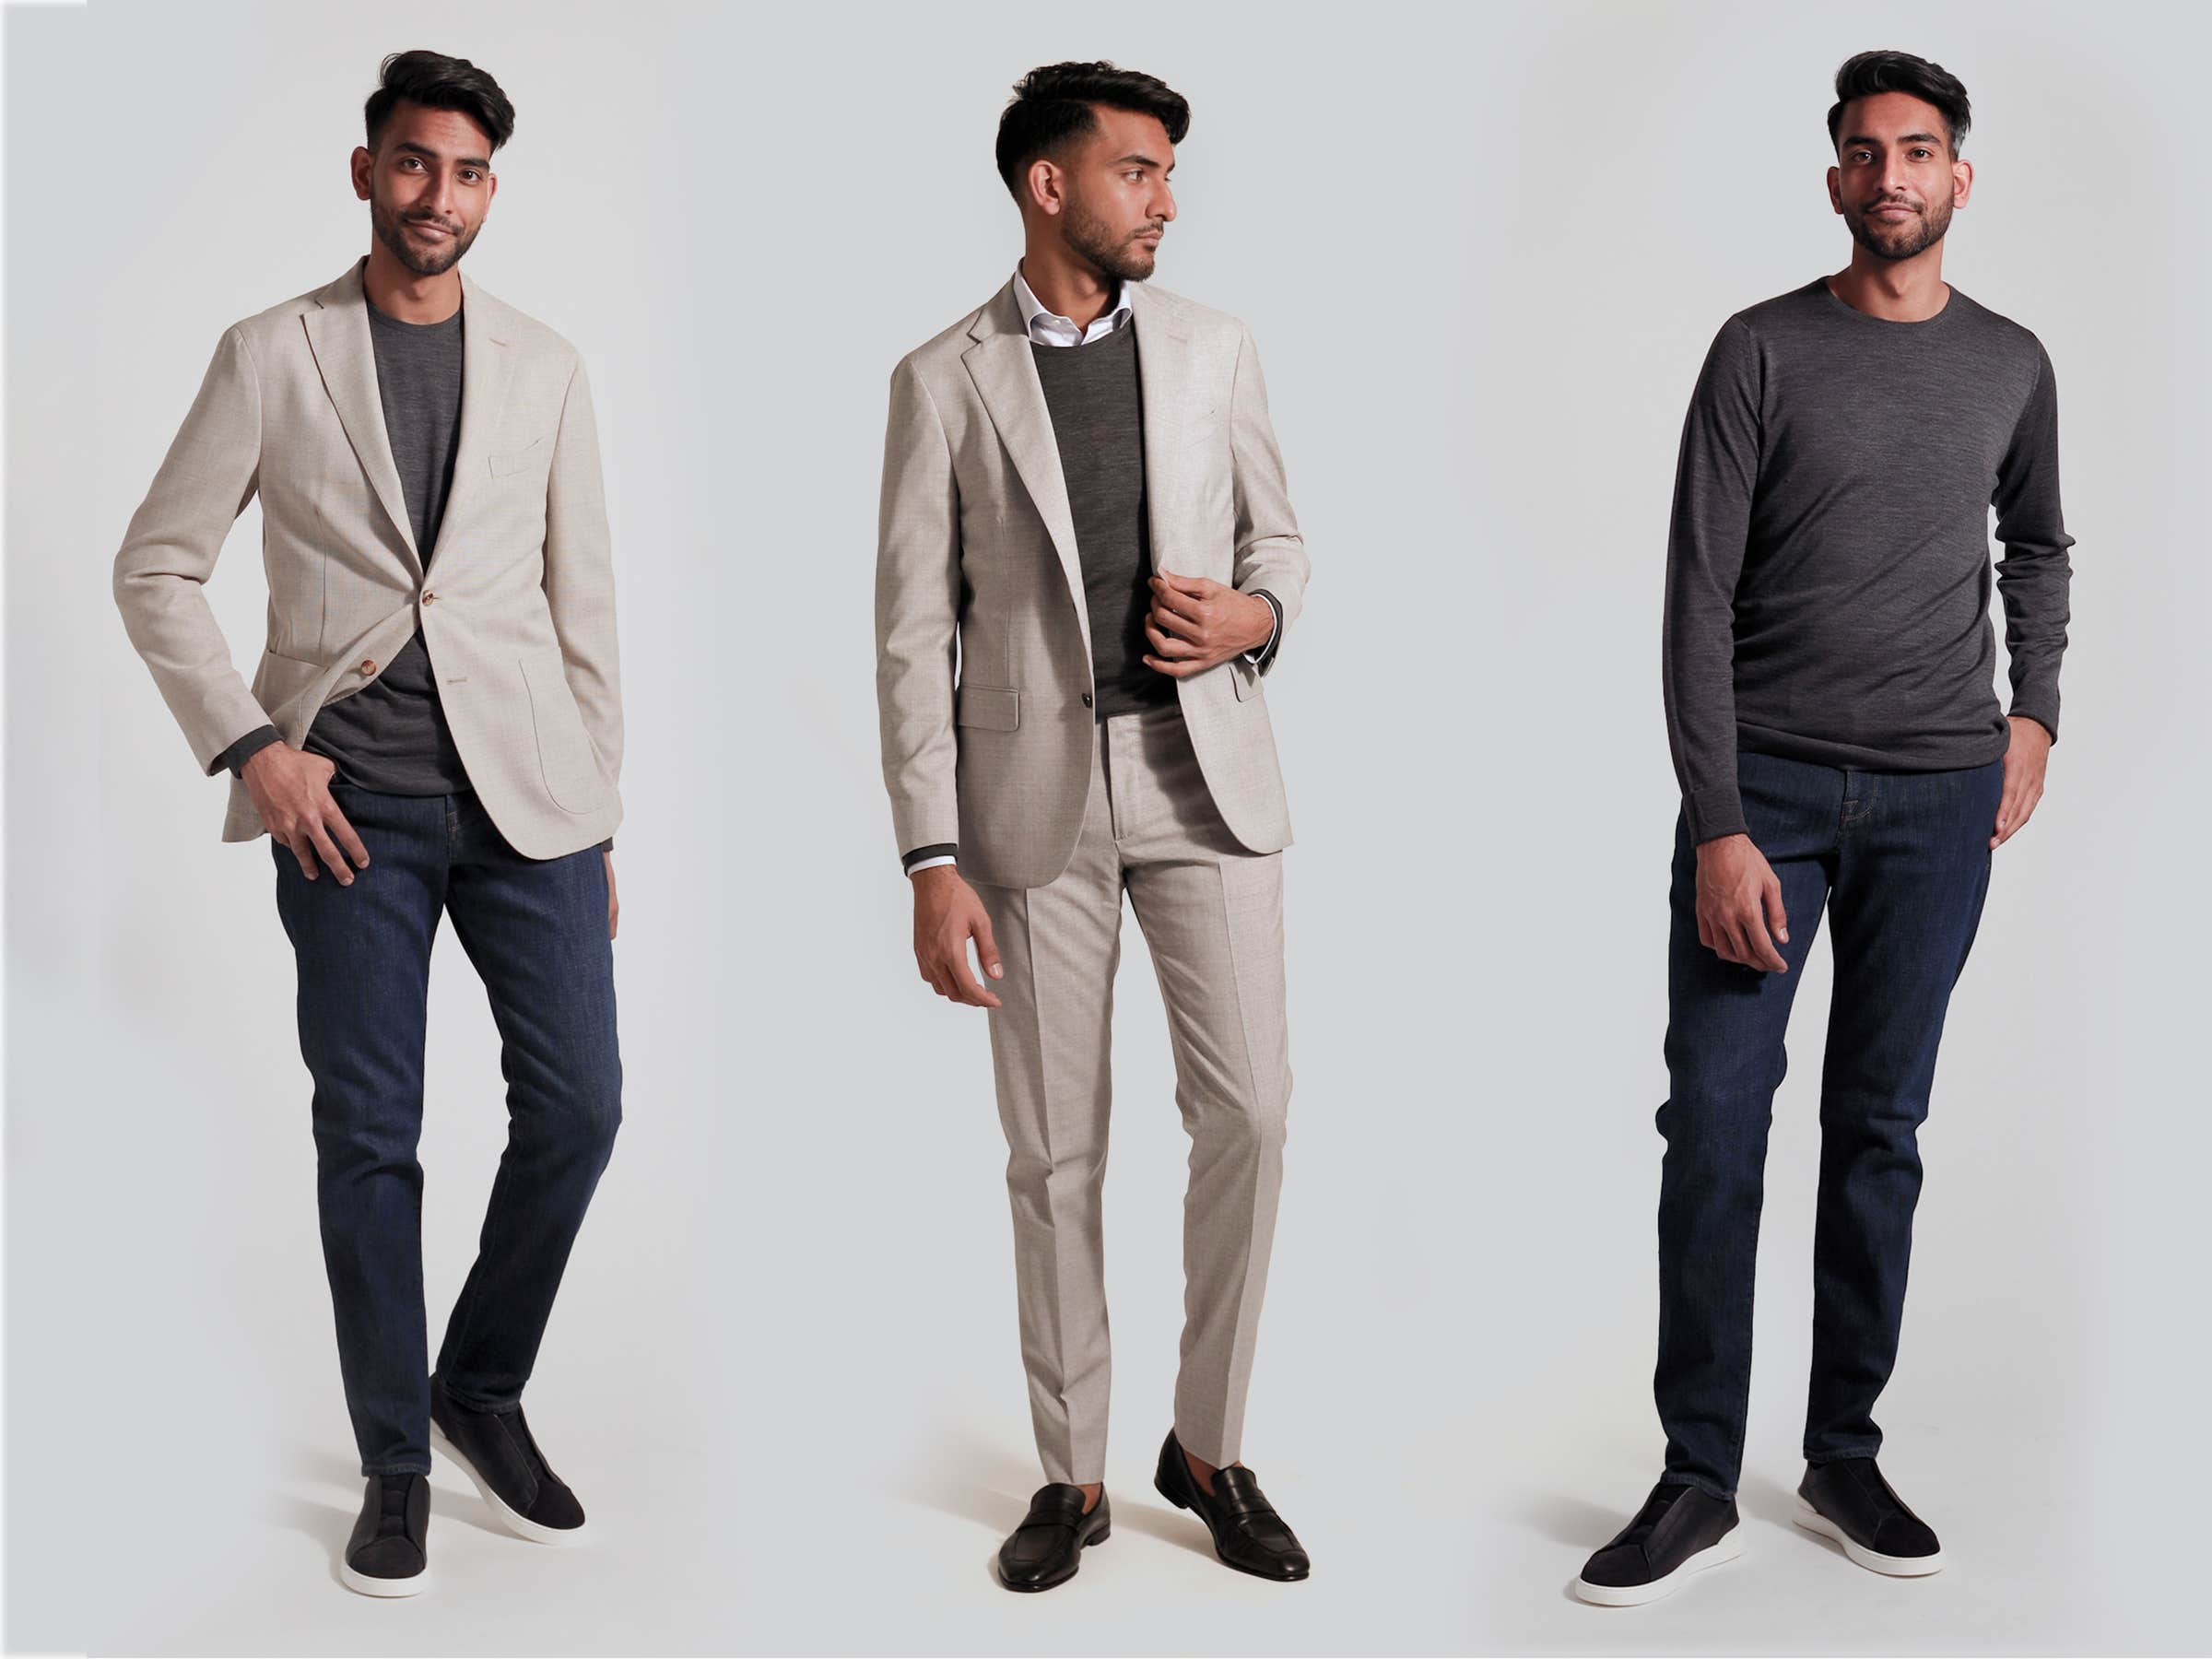 Occasion-Perfect Pairings: Elevating Formal Attire with Jeggings